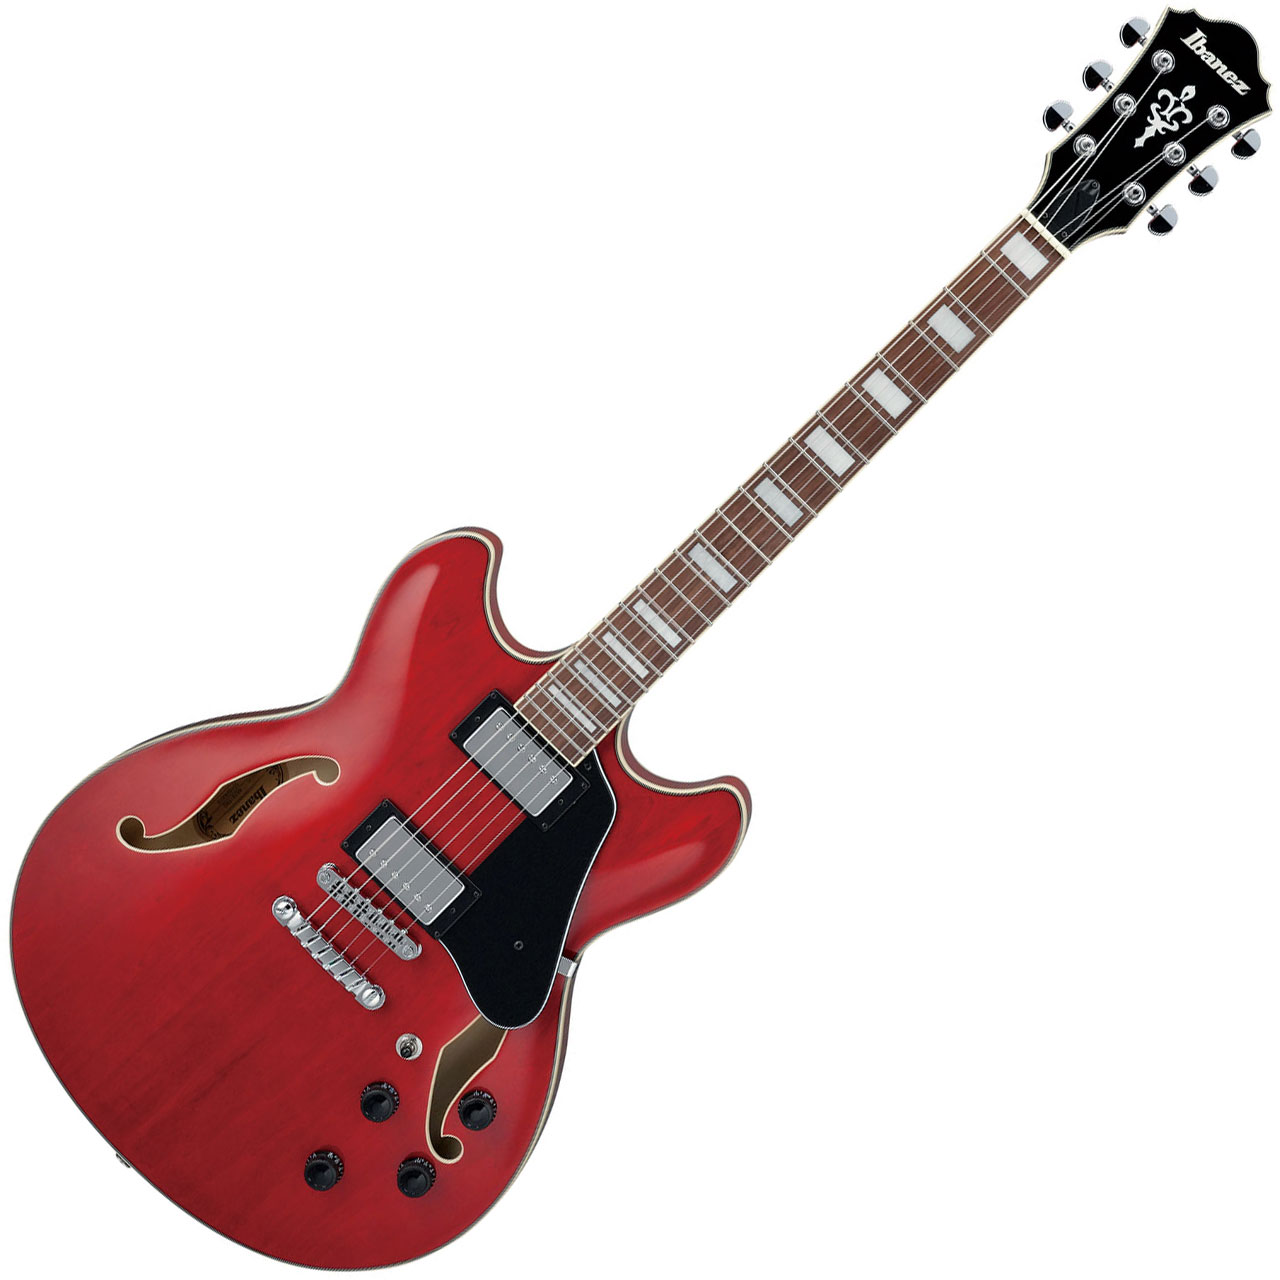 Ibanez AS73 TCD Artcore - transparent cherry red Semi-hollow 